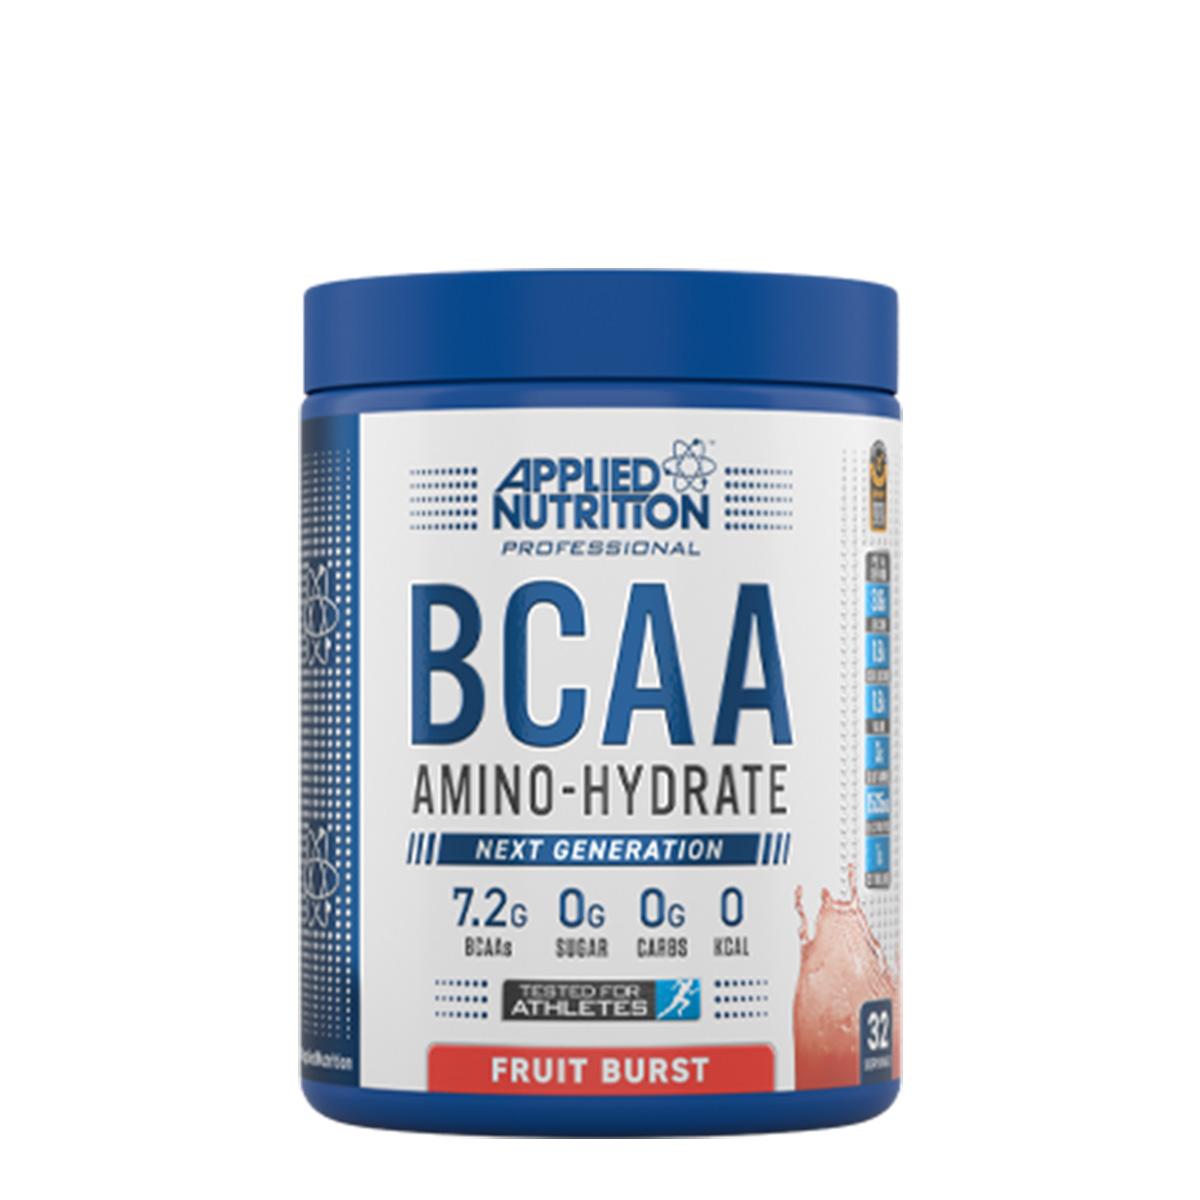 Selected image for APPLIED NUTRITION Aminokiseline BCAA Amino Hydrate Voćni miks 450g